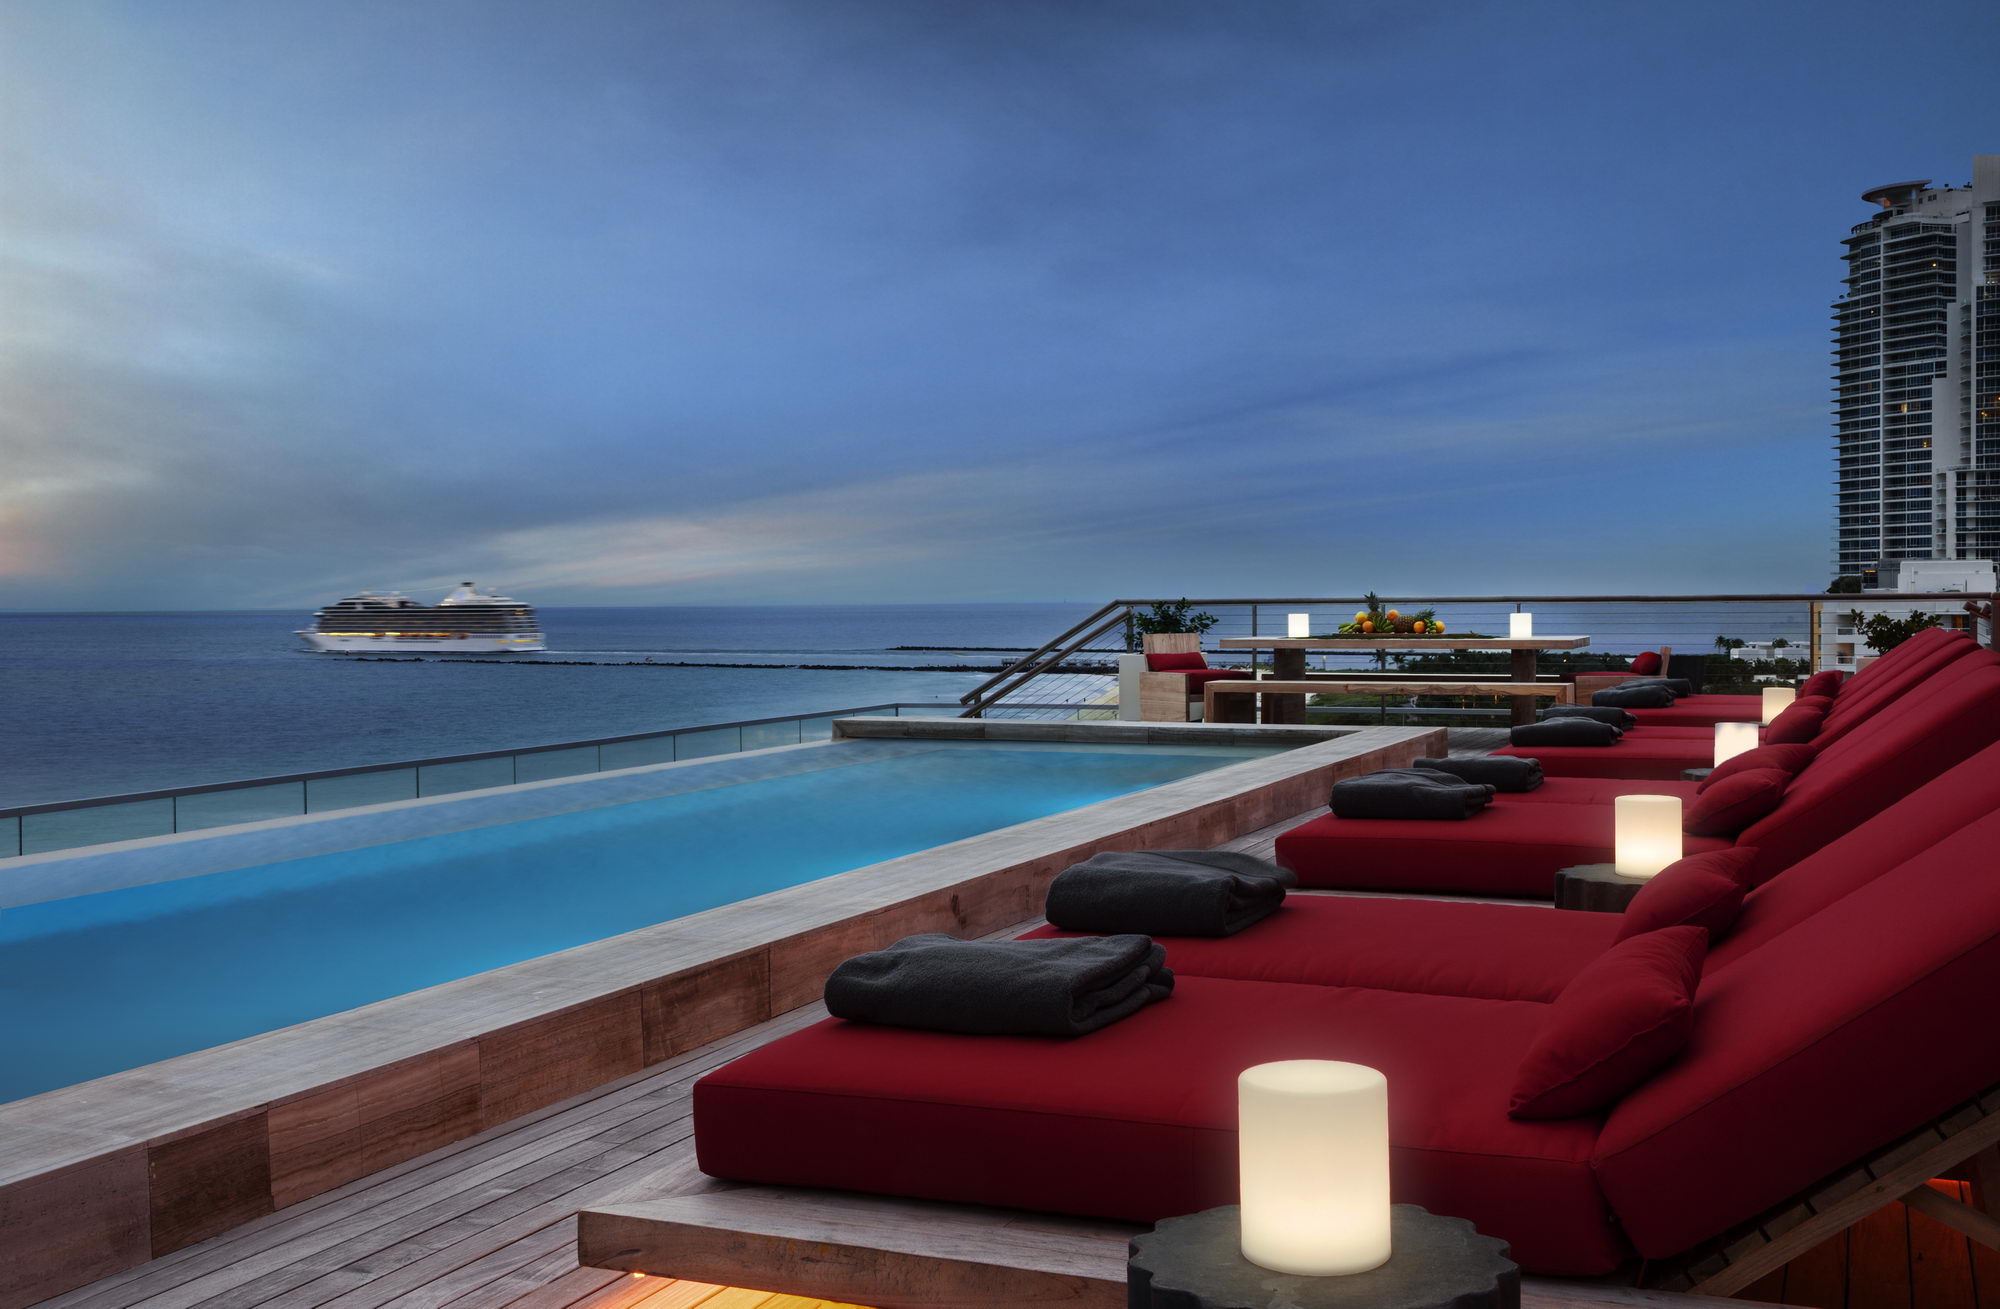 Ocean penthouse beach view south beach Miami Florida contemporary apartment exterior terrace deck infinity pool ocean view cruise lounge chairs